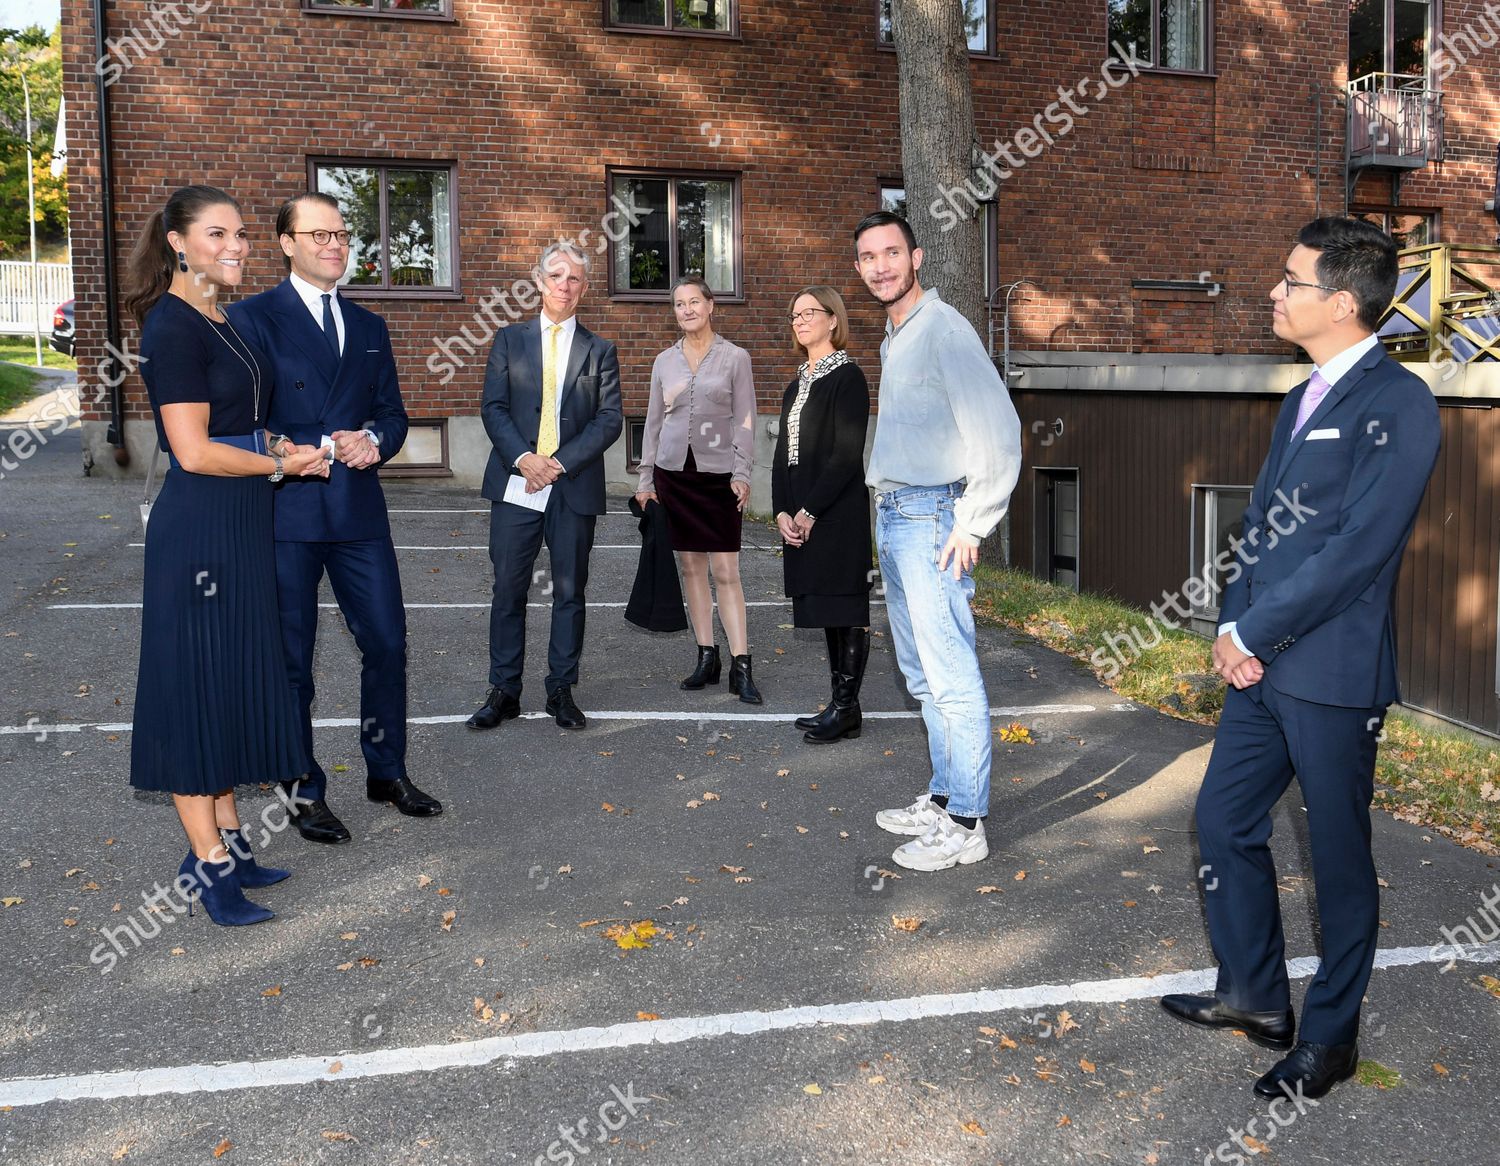 crown-princess-victoria-and-prince-daniel-visit-the-swedish-performing-arts-association-stockholm-sweden-shutterstock-editorial-10788094a.jpg